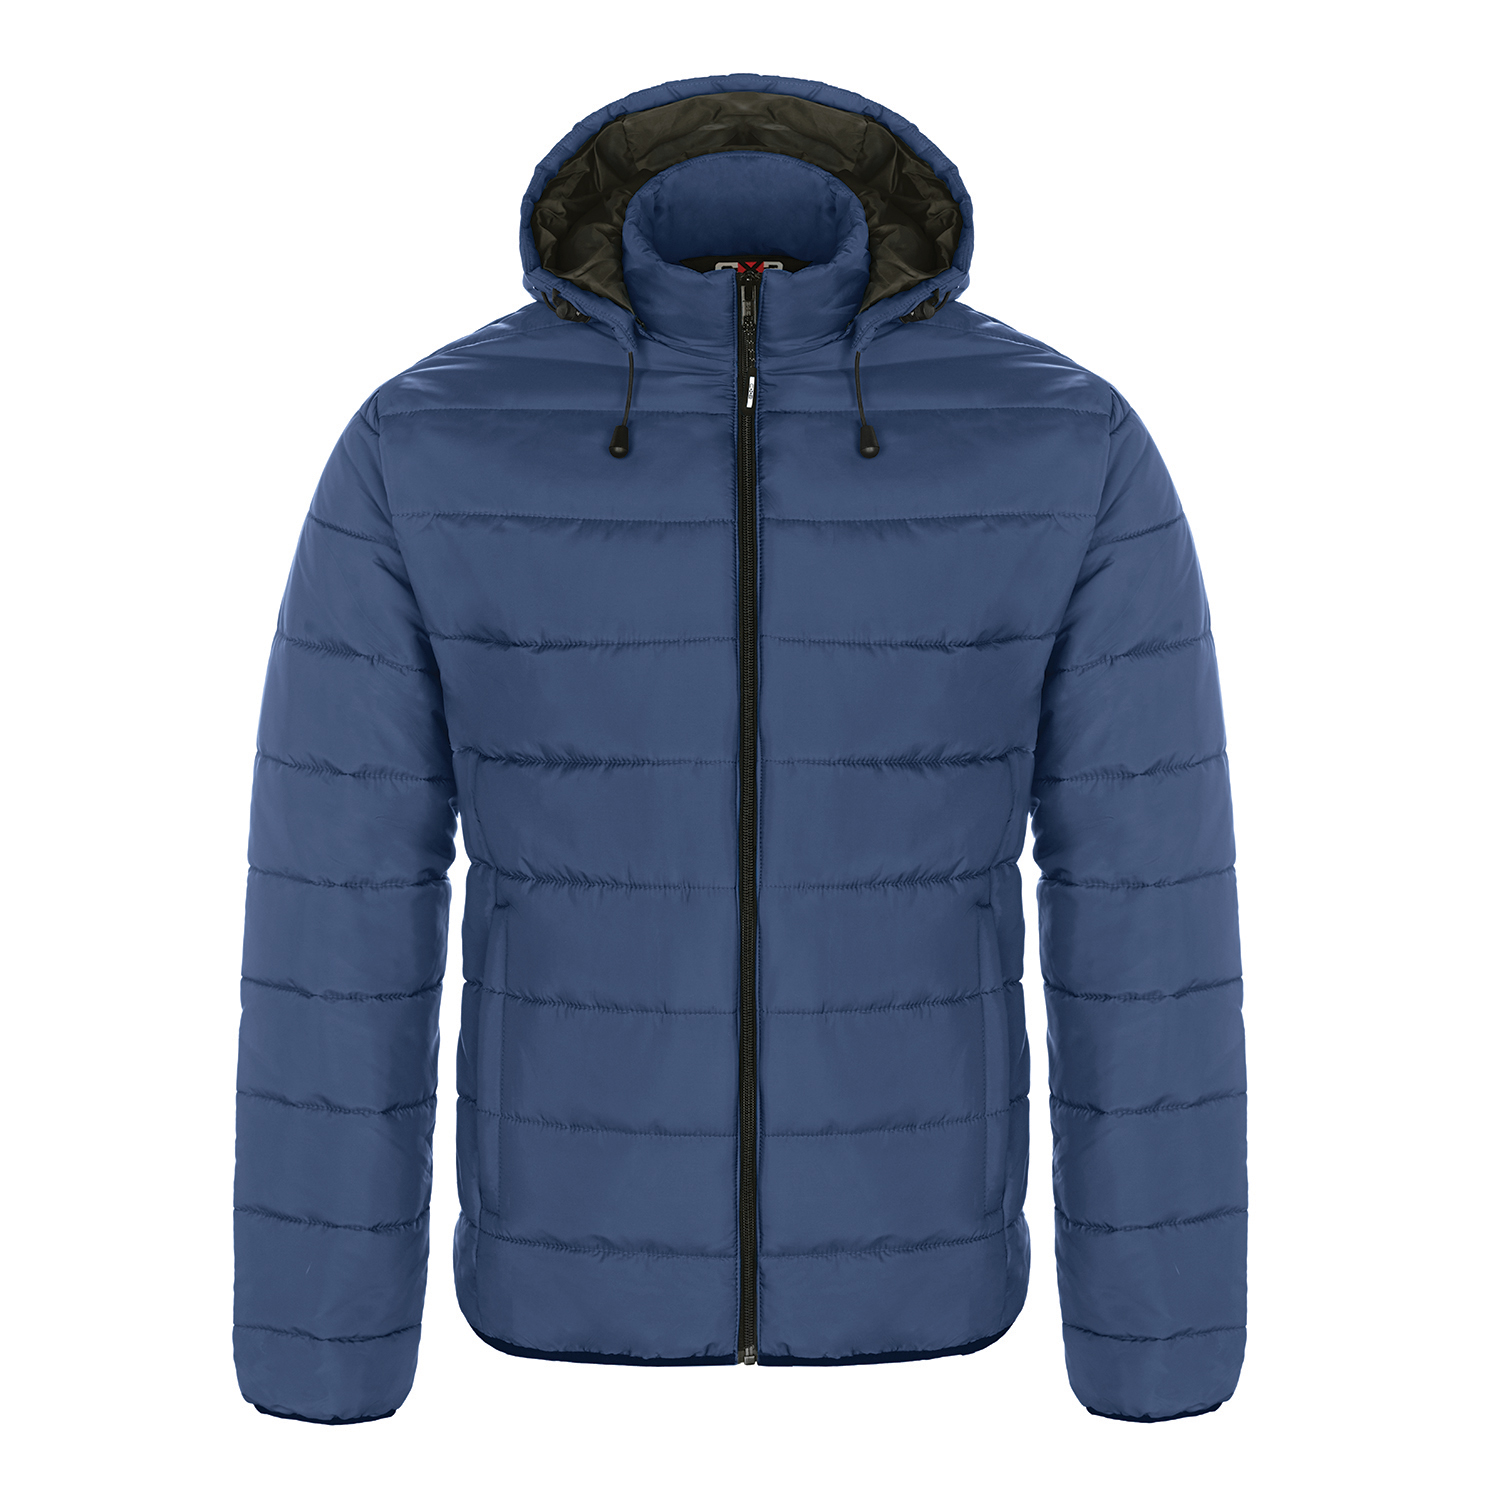 CX2 - Glacial - Youth Puffy Jacket with Detachable Hood